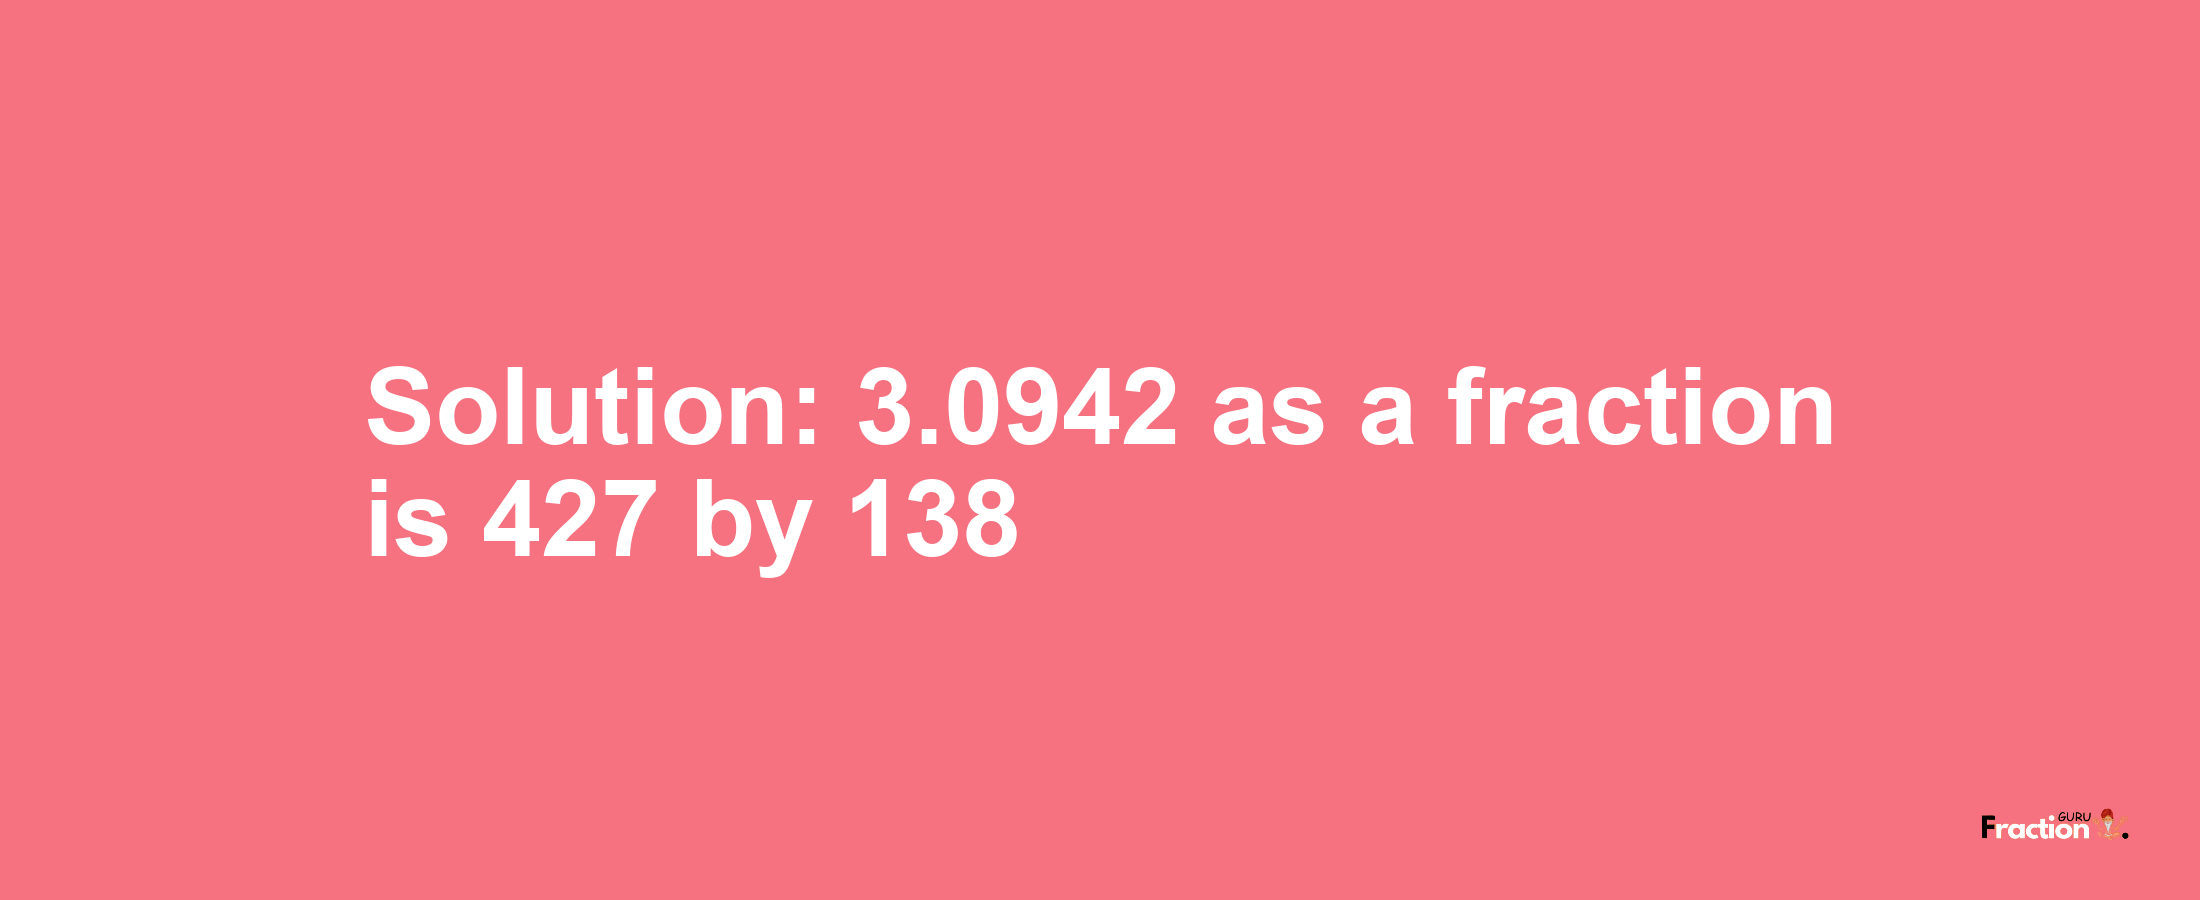 Solution:3.0942 as a fraction is 427/138